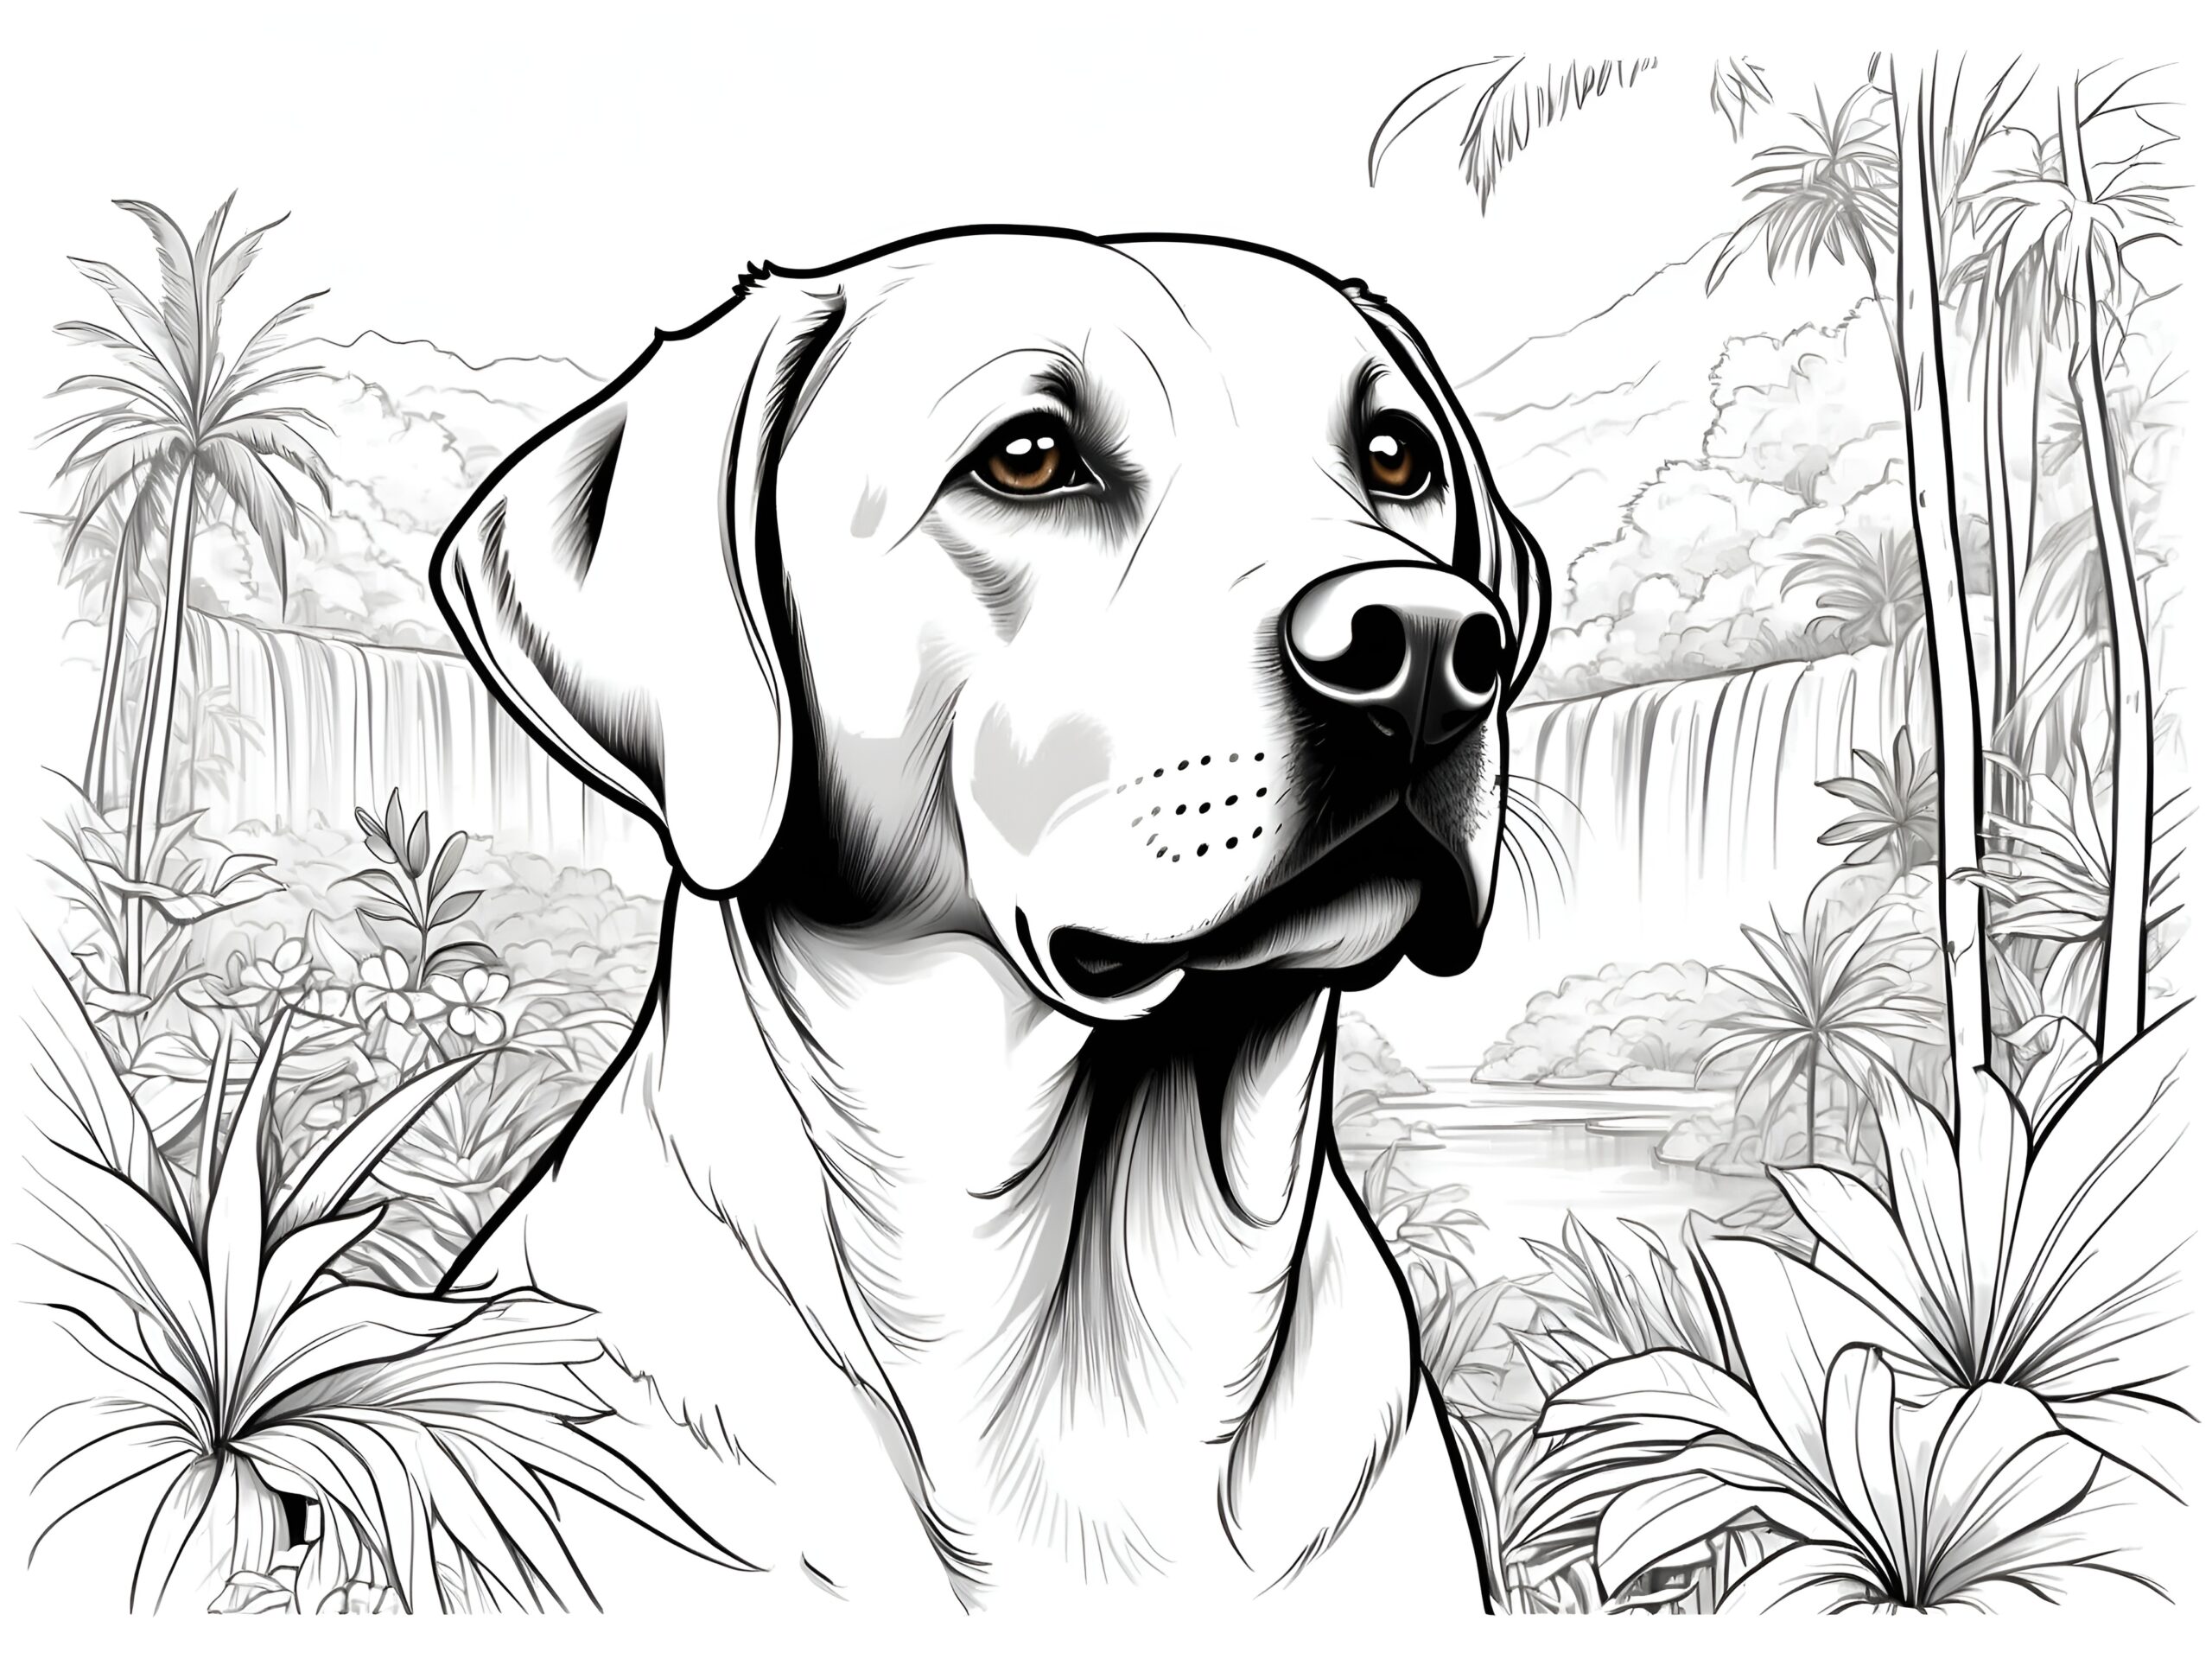 Default he face of a Labrador with a lush tropical forest and 2 2854eda1 4d19 4be8 9ebb e218f0019021 0